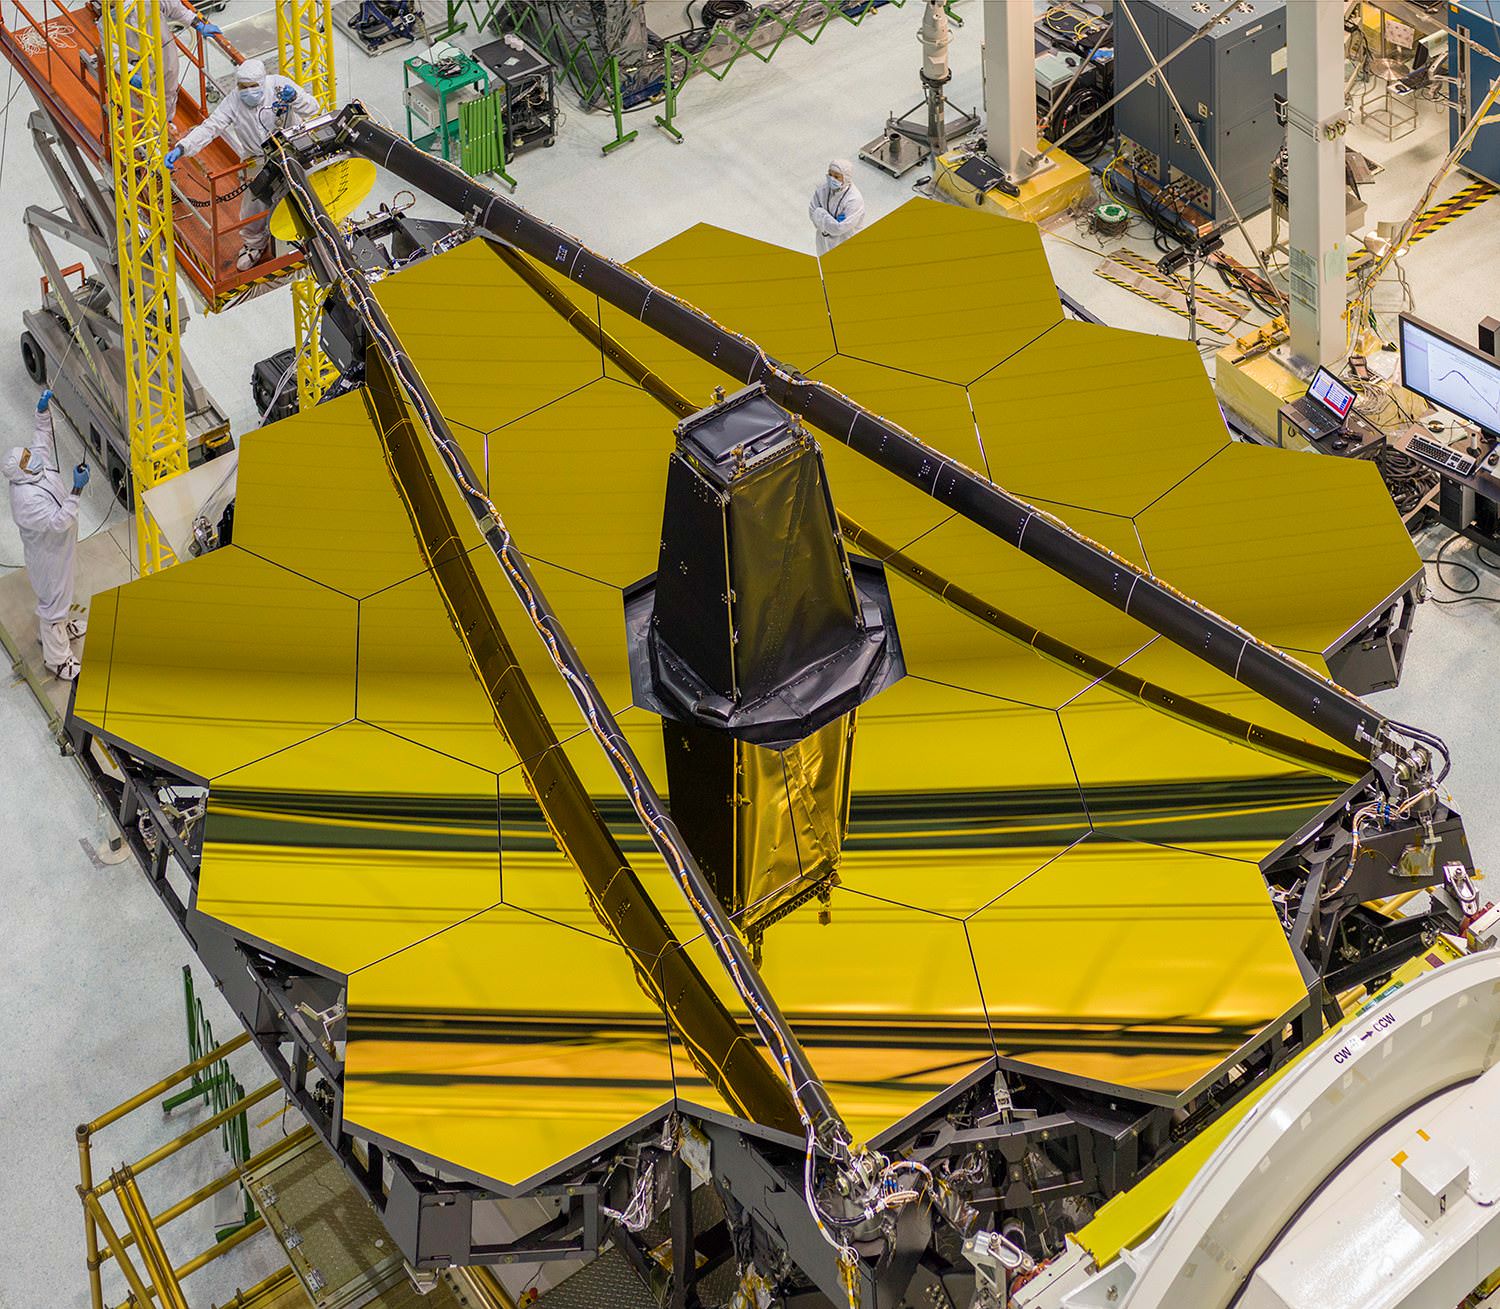 Behold, the mighty primary mirror of the James Webb Space Telescope, in all its gleaming glory! Image: NASA/Chris Gunn